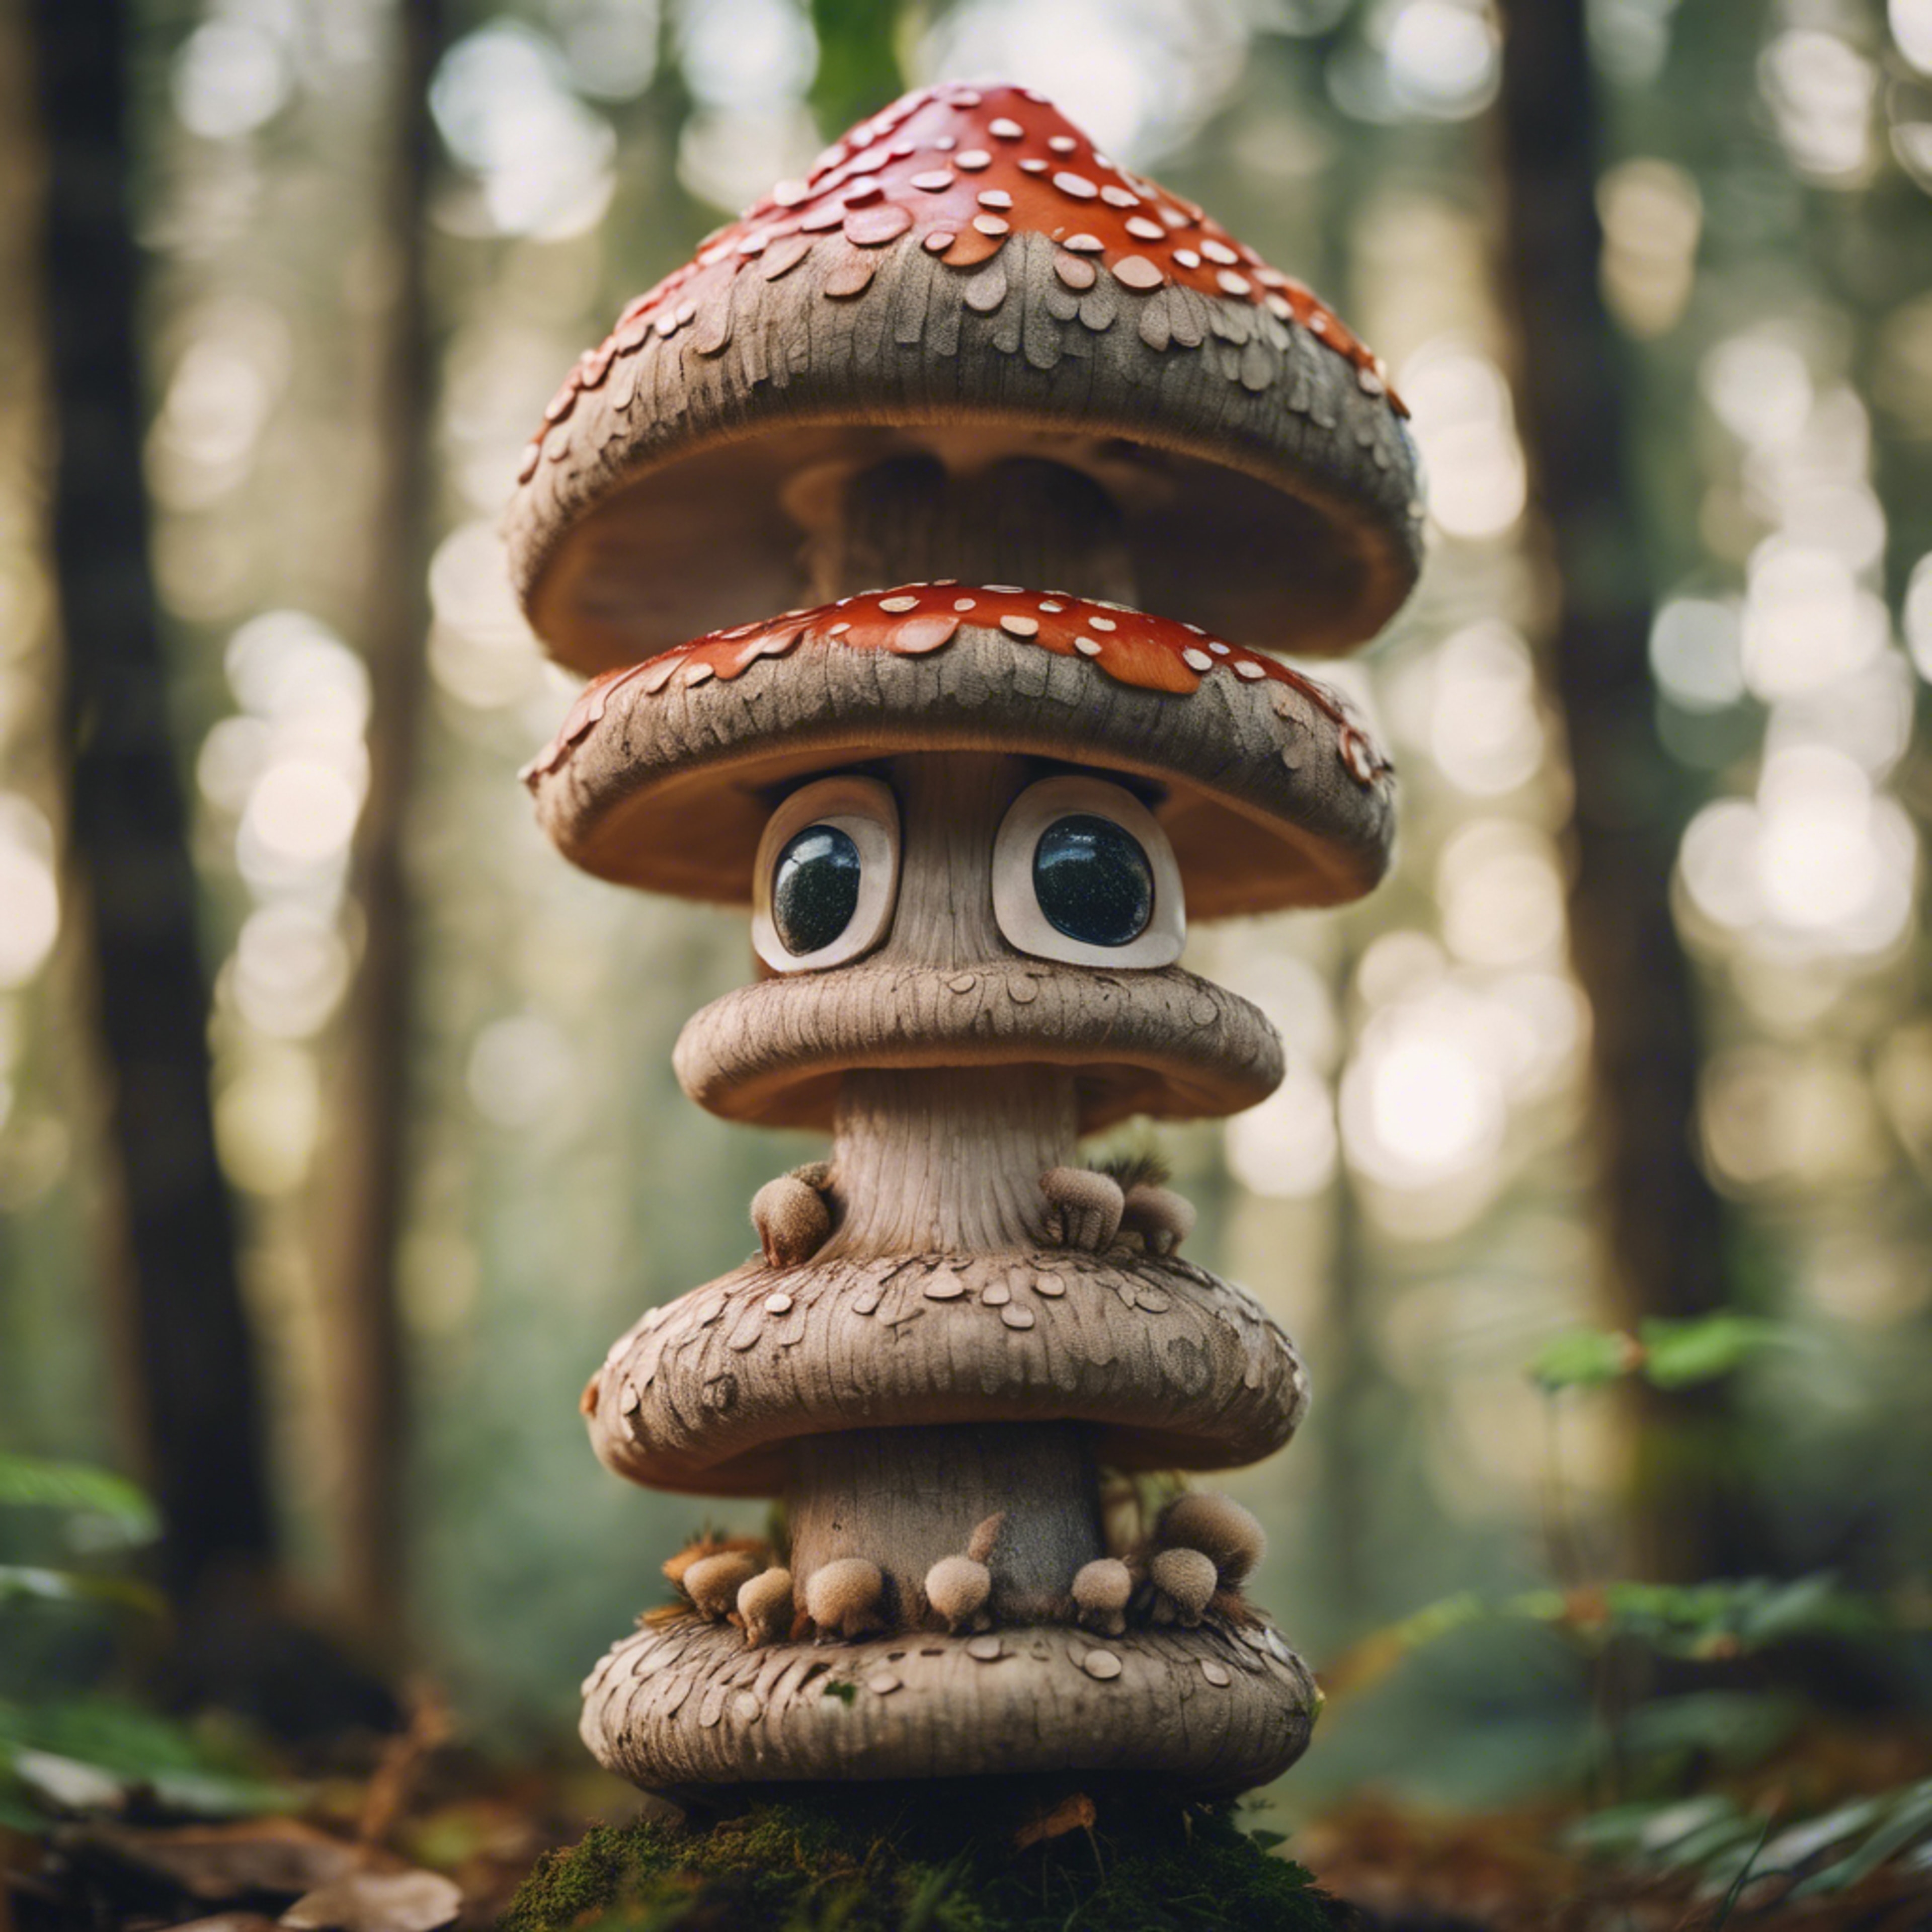 A couple of cute Mushrooms playfully stacking up to form a totem pole in a whimsical forest. Tapetai[433a45e1c3f24476b32f]